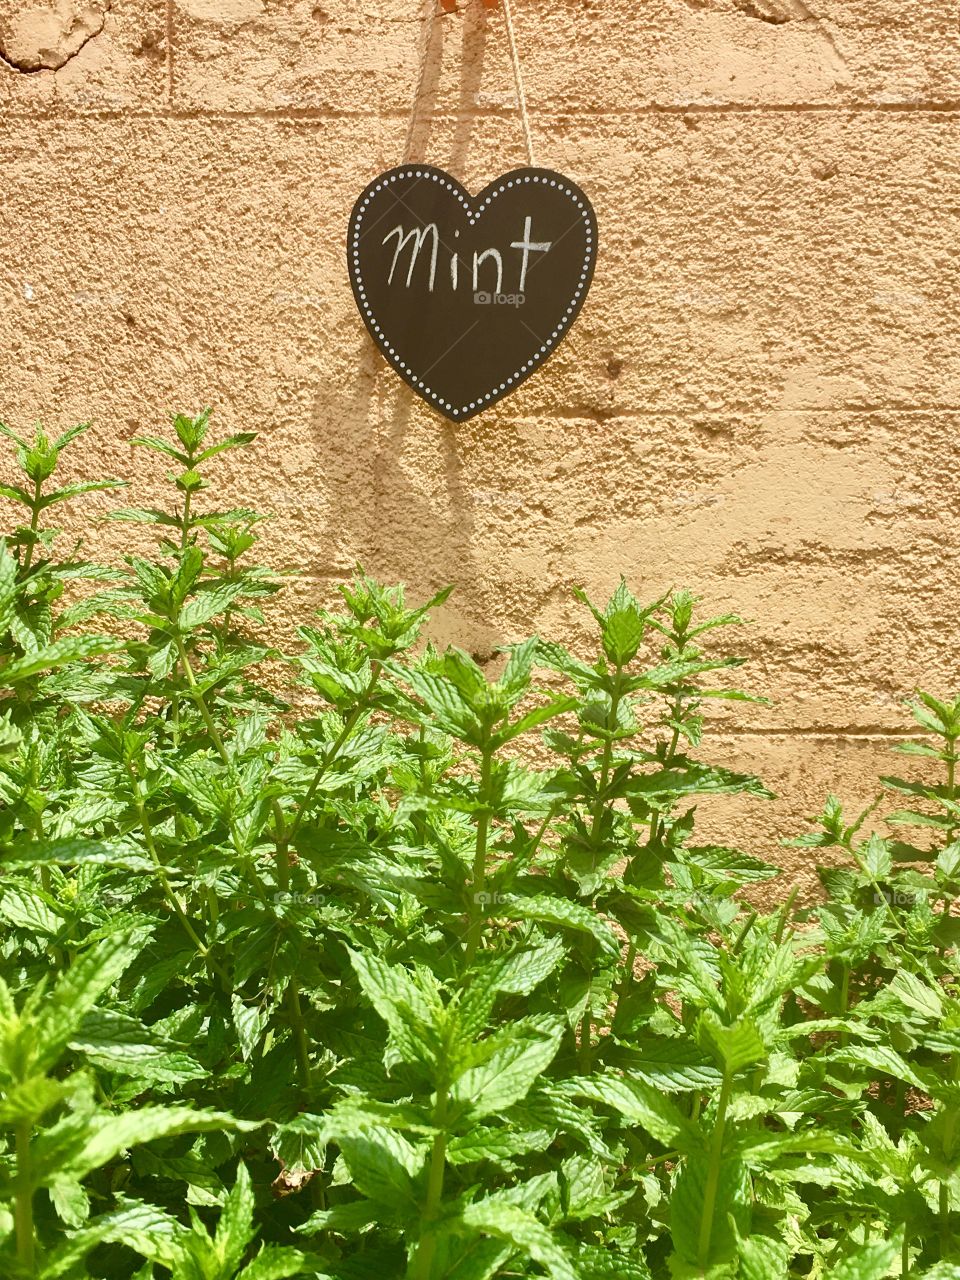 Mint growing outdoors in front of old stucco wall; heart shape plaque label with word “mint” 